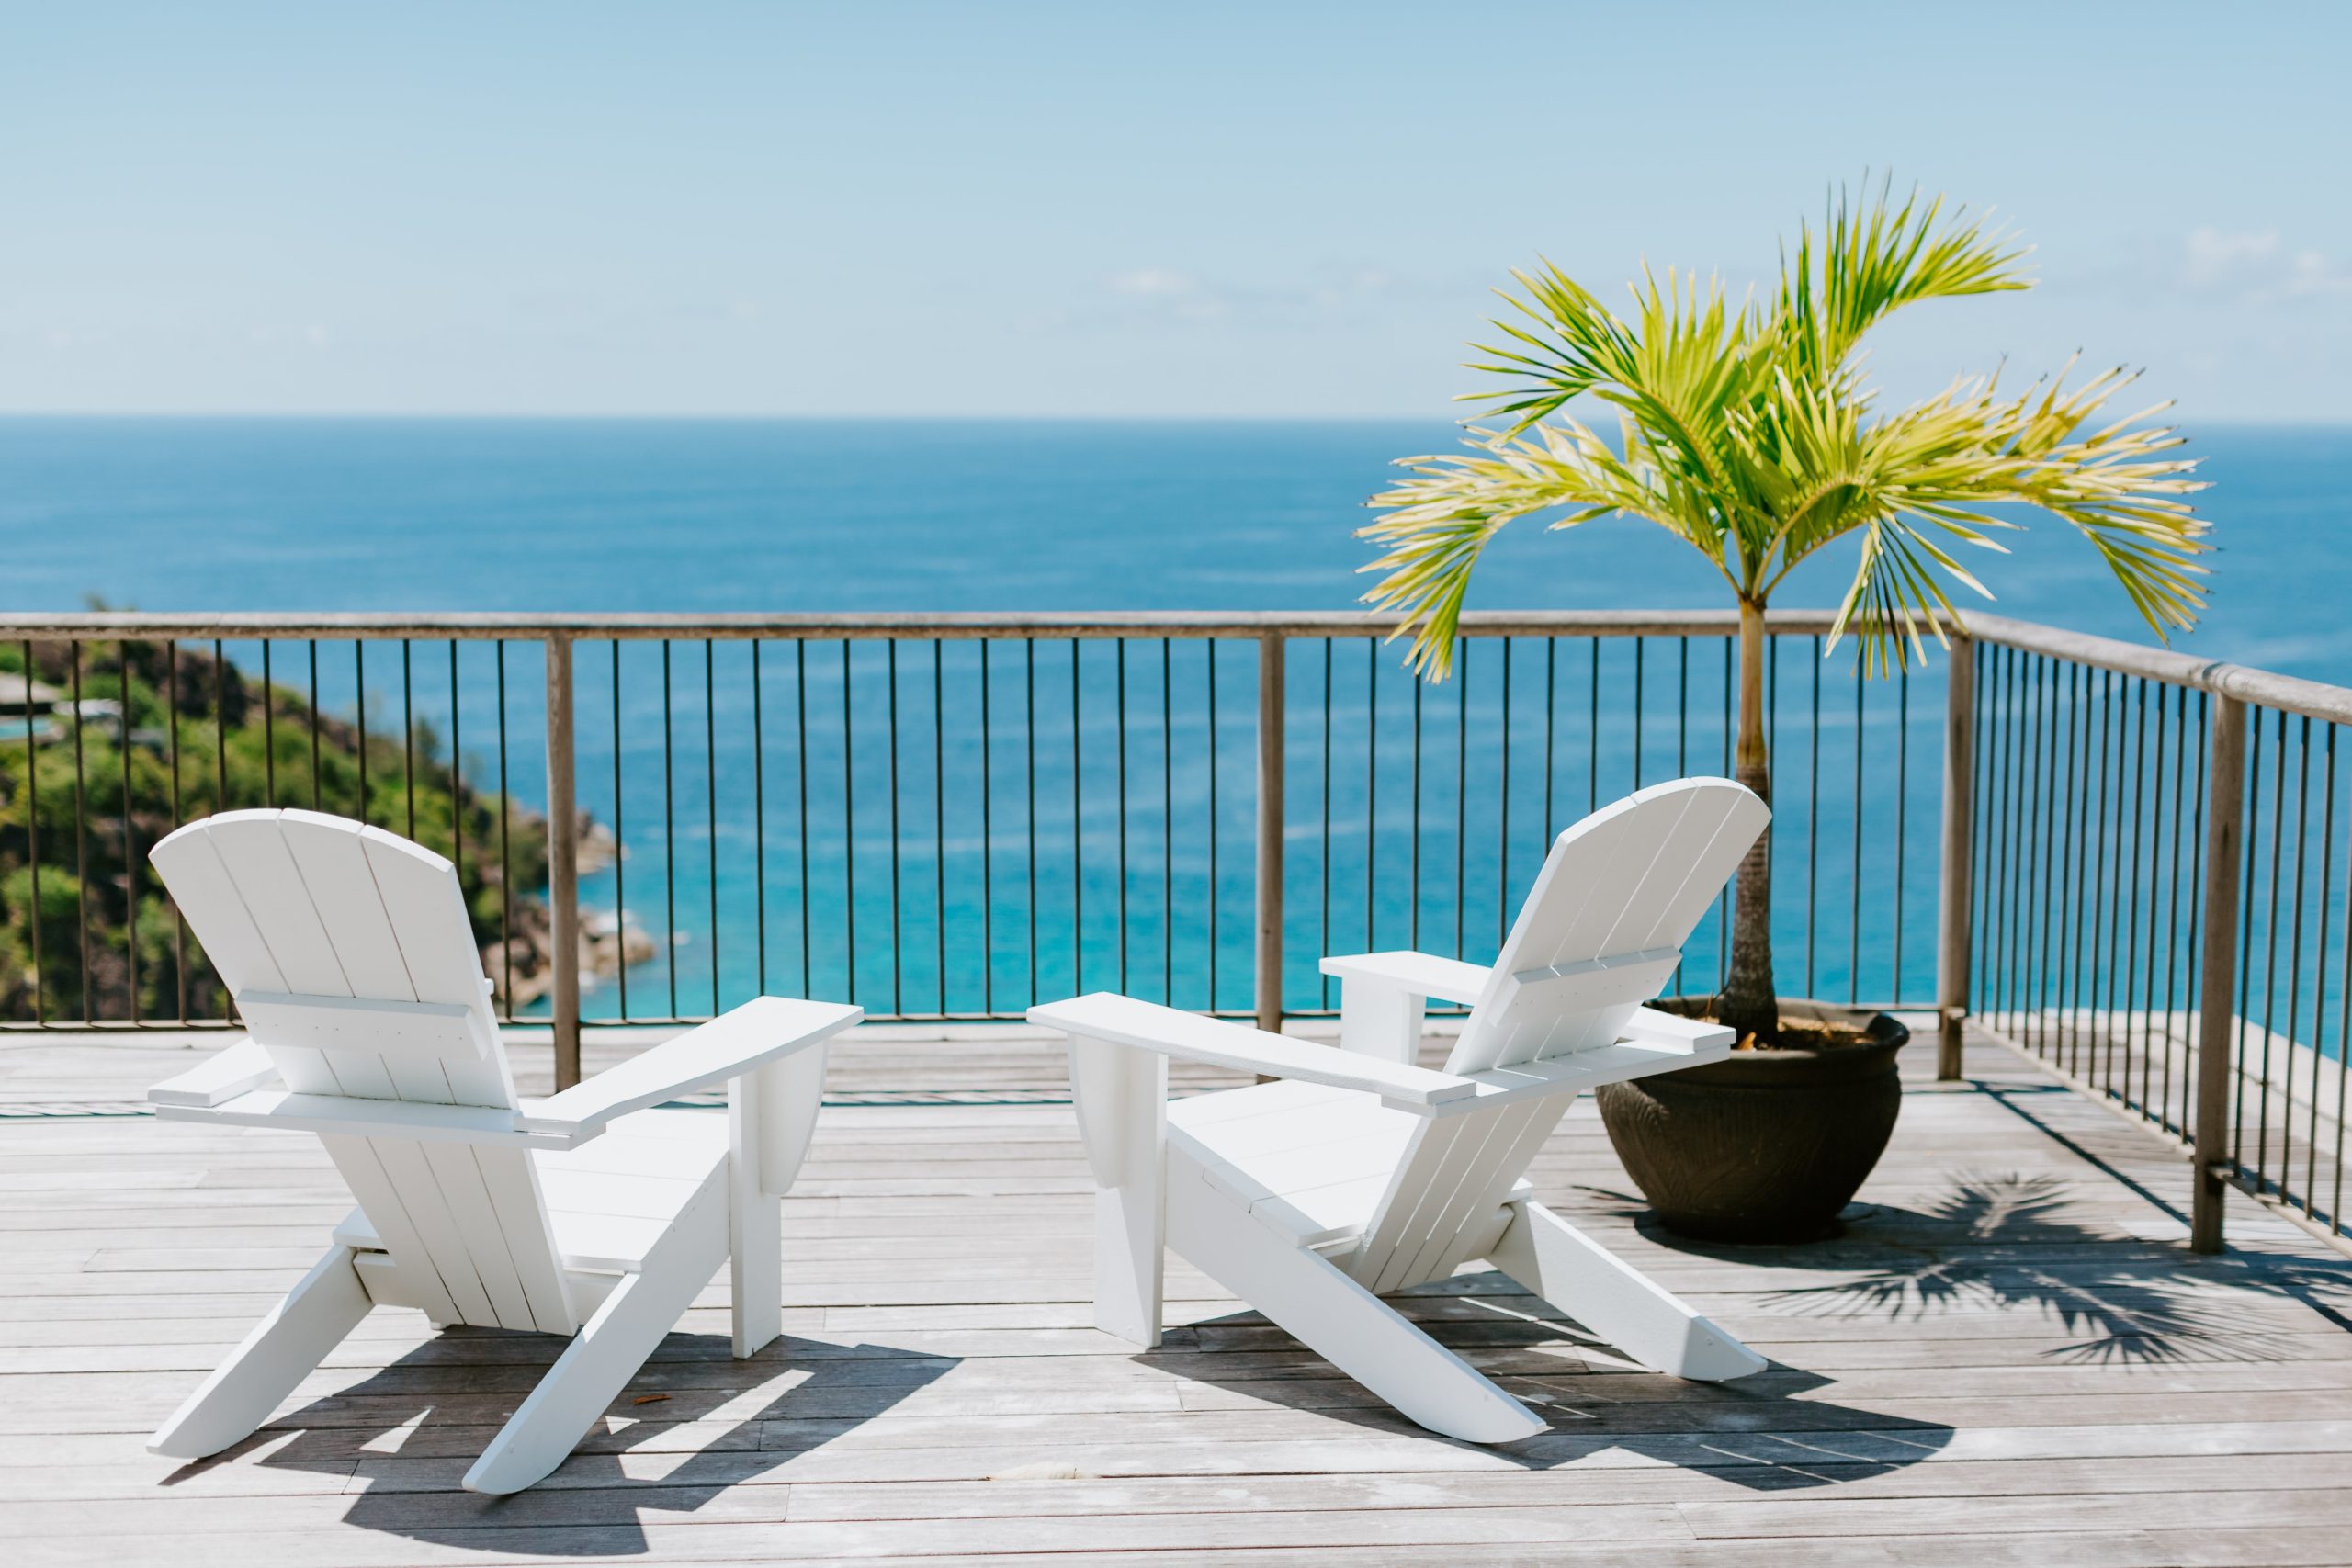 How to Choose Your Vacation Rental on Anna Maria Island